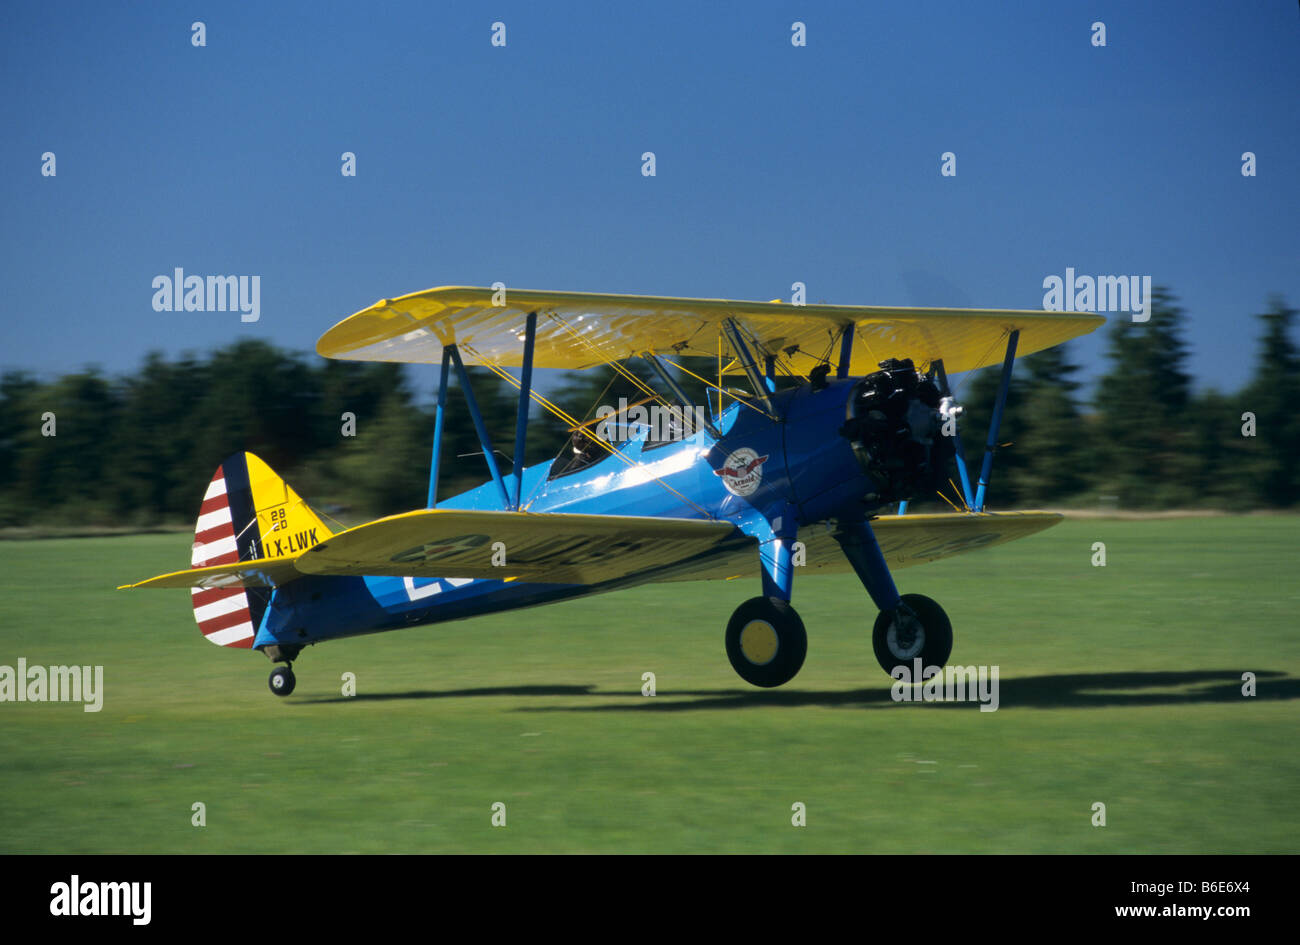 Old american trainer biplane Boeing PT-17 Kaydet / Stearman model 75 landing on a green grass airfield Stock Photo